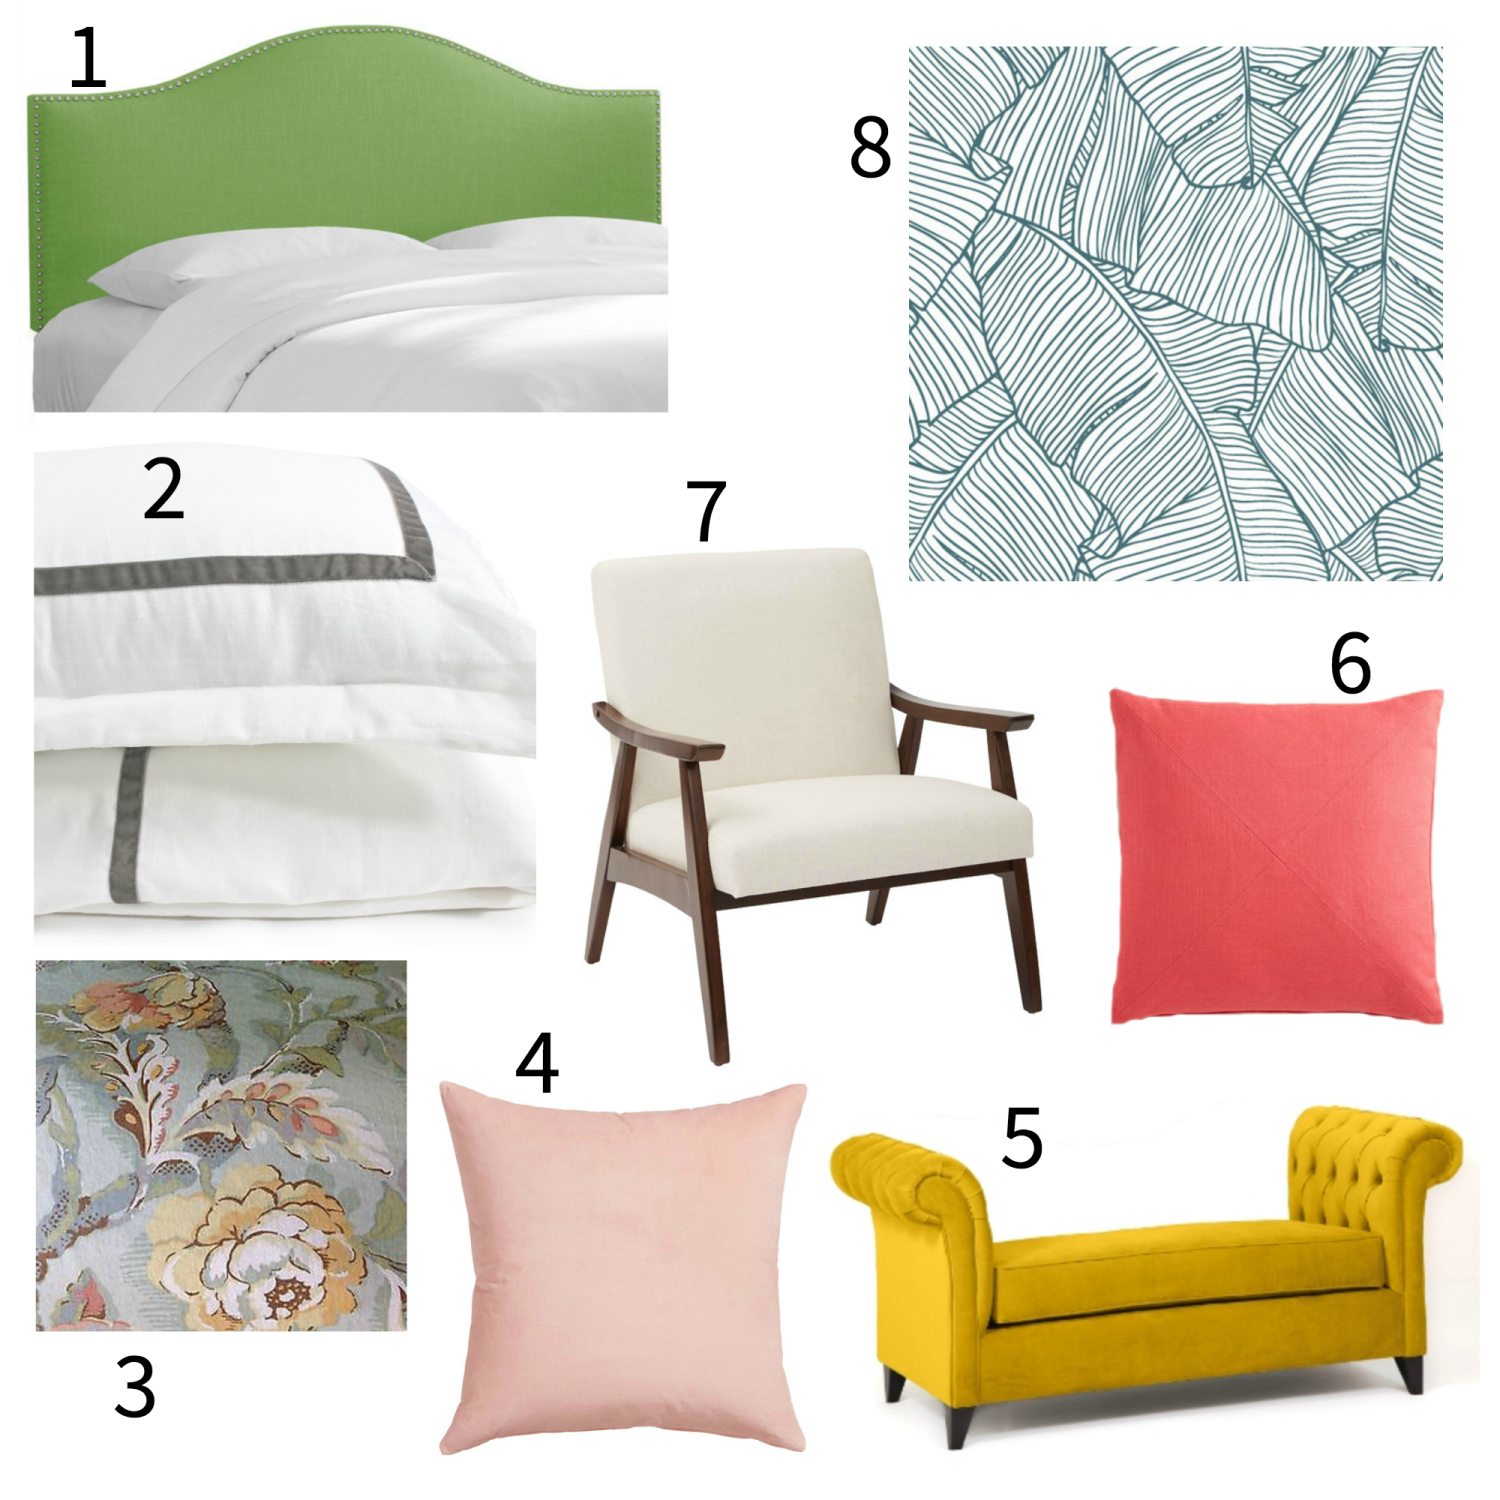 Cheerful guest bedroom plans with sources